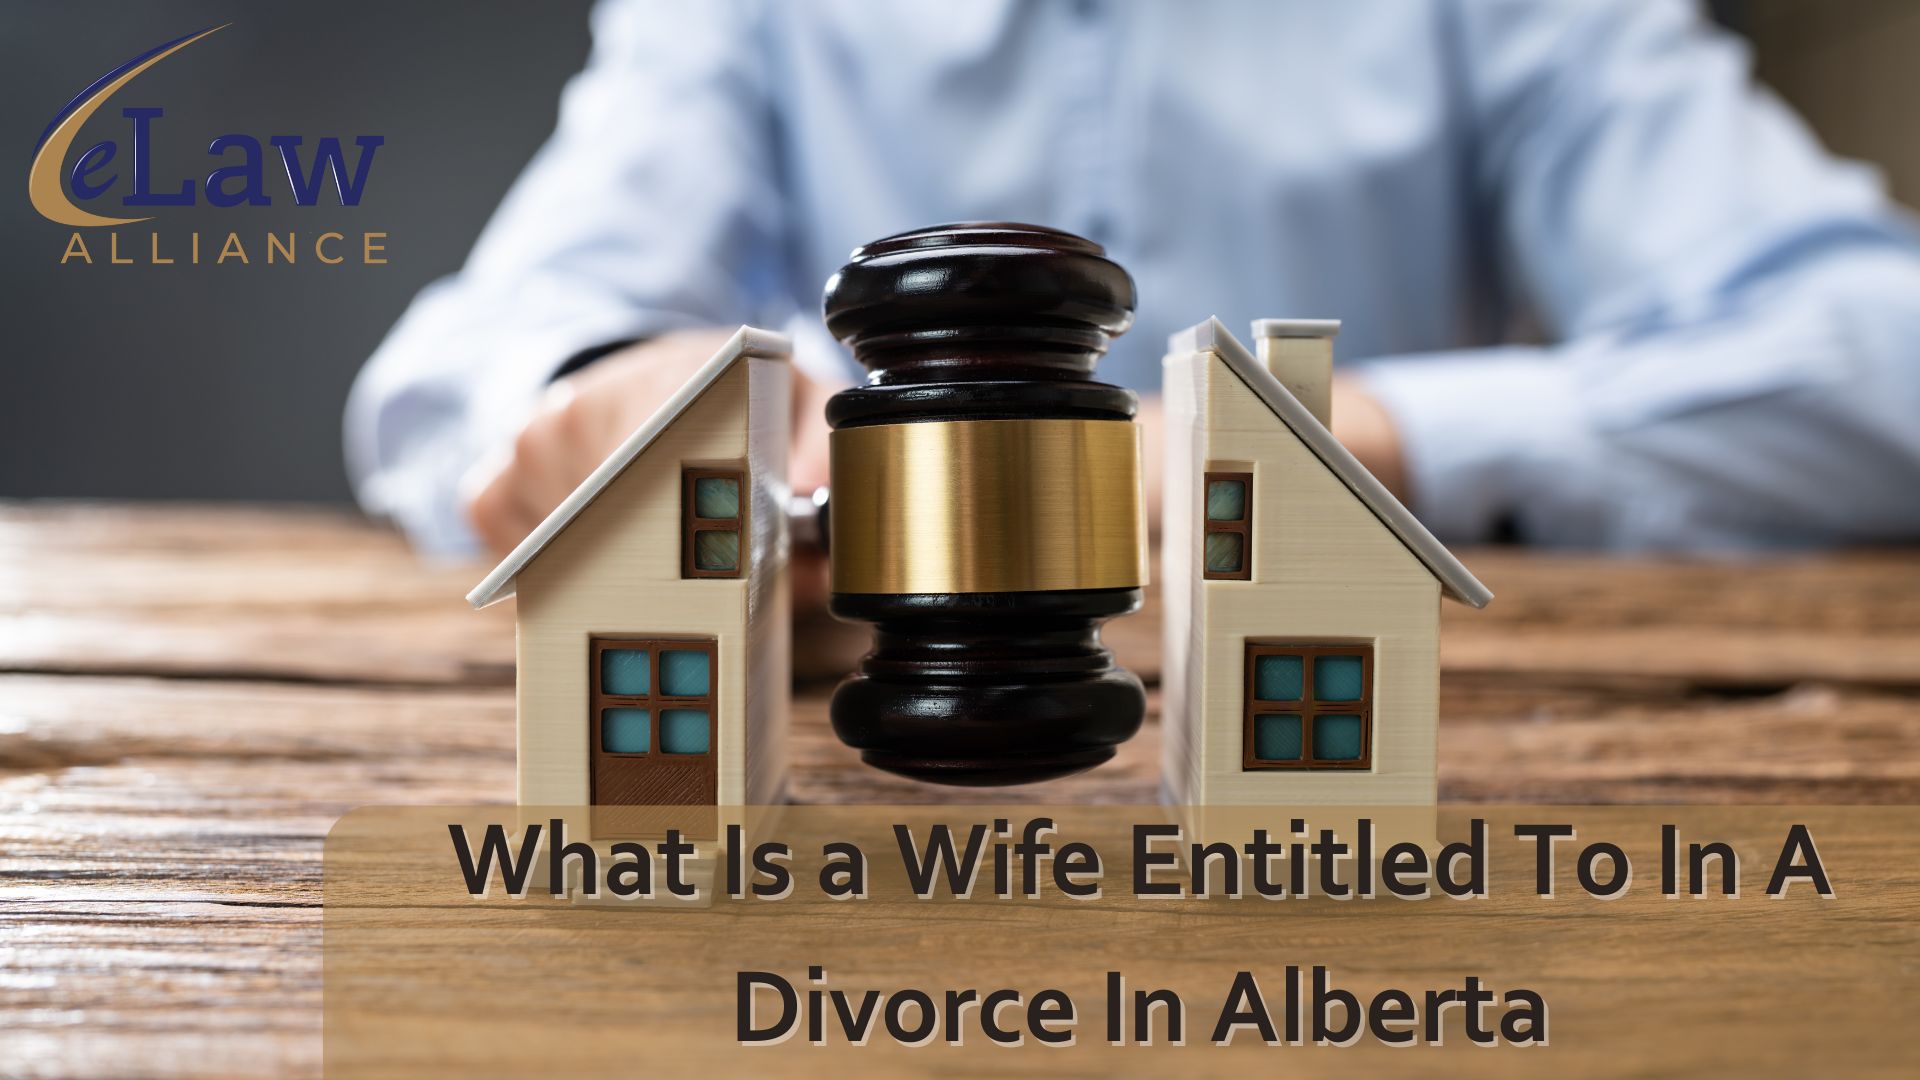 What Is a Wife Entitled To In A Divorce In Alberta